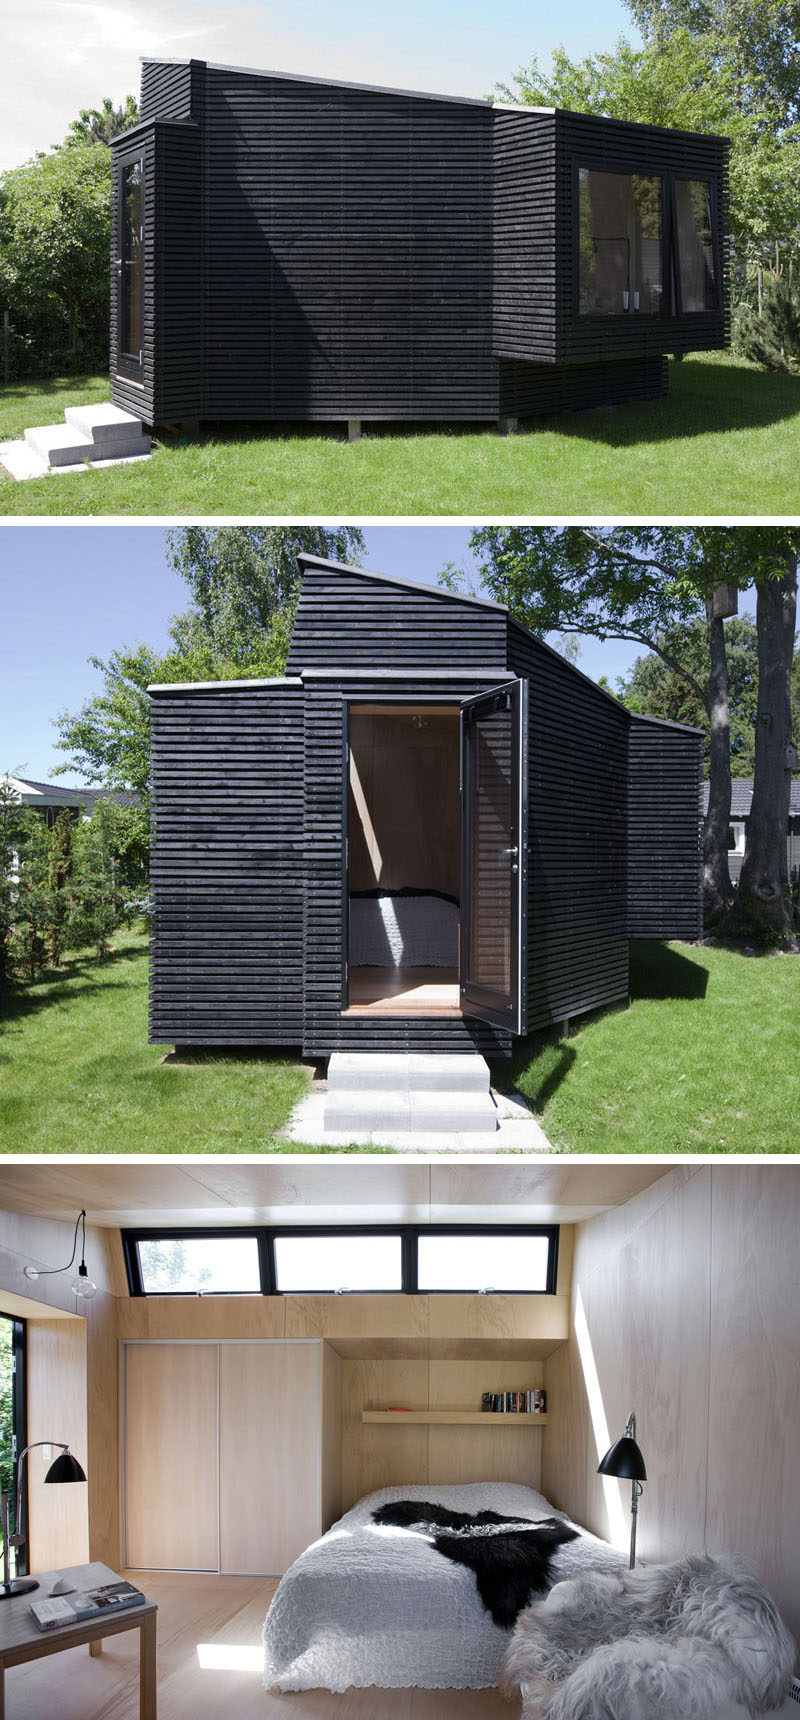 Clad in black timber, this backyard guest house is just the right size for a visiting friend or family member, and features a number of windows that help keep the tiny home naturally bright and ventilated, as well as some closet space for people who are staying a little bit longer.